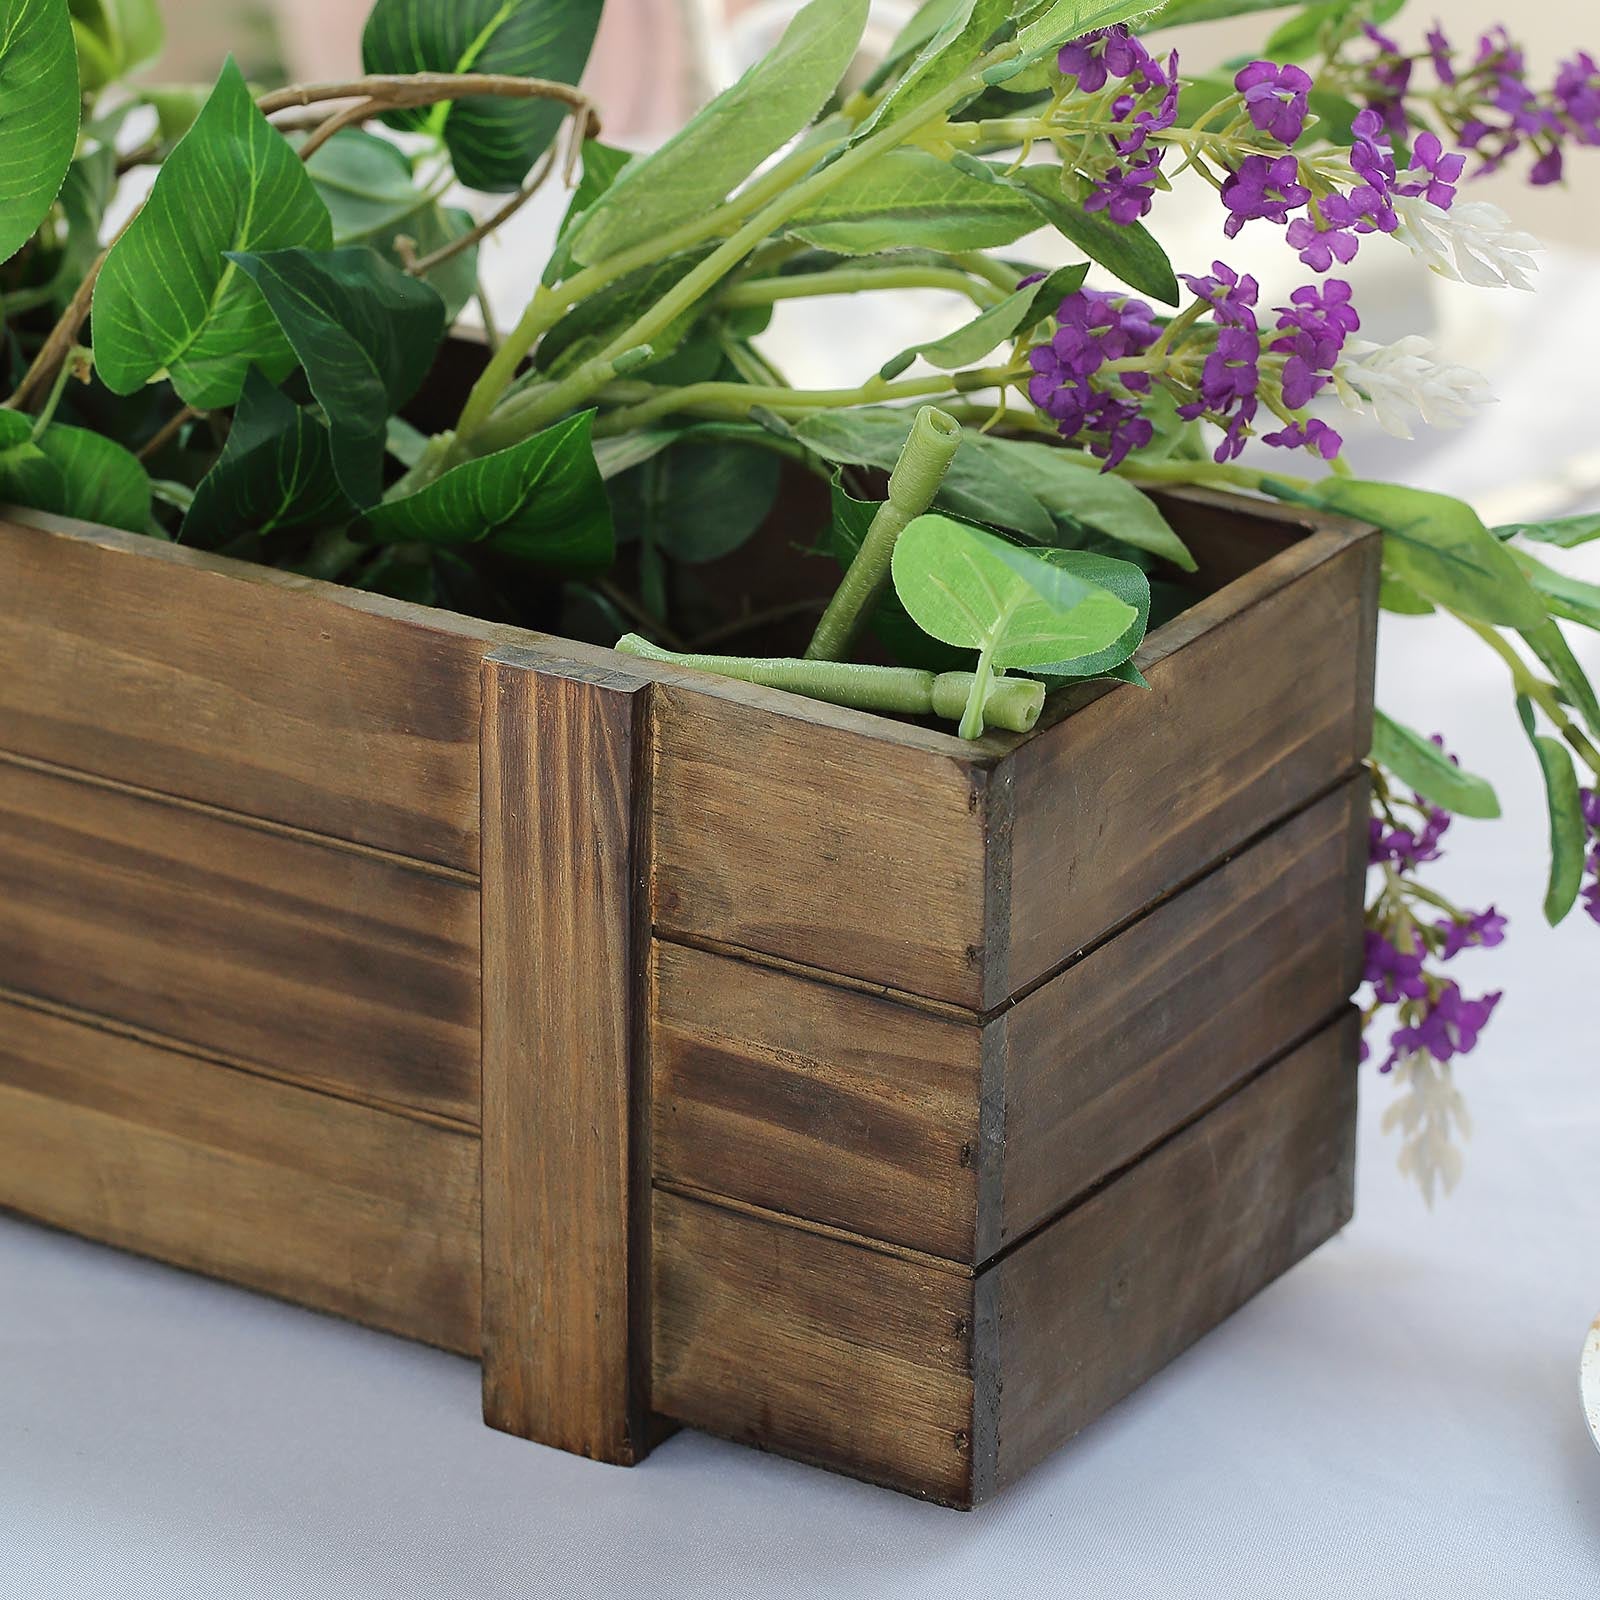 24x6'' Rectangle Wood Boxes DIY Rustic Wooden Planter Boxes With 